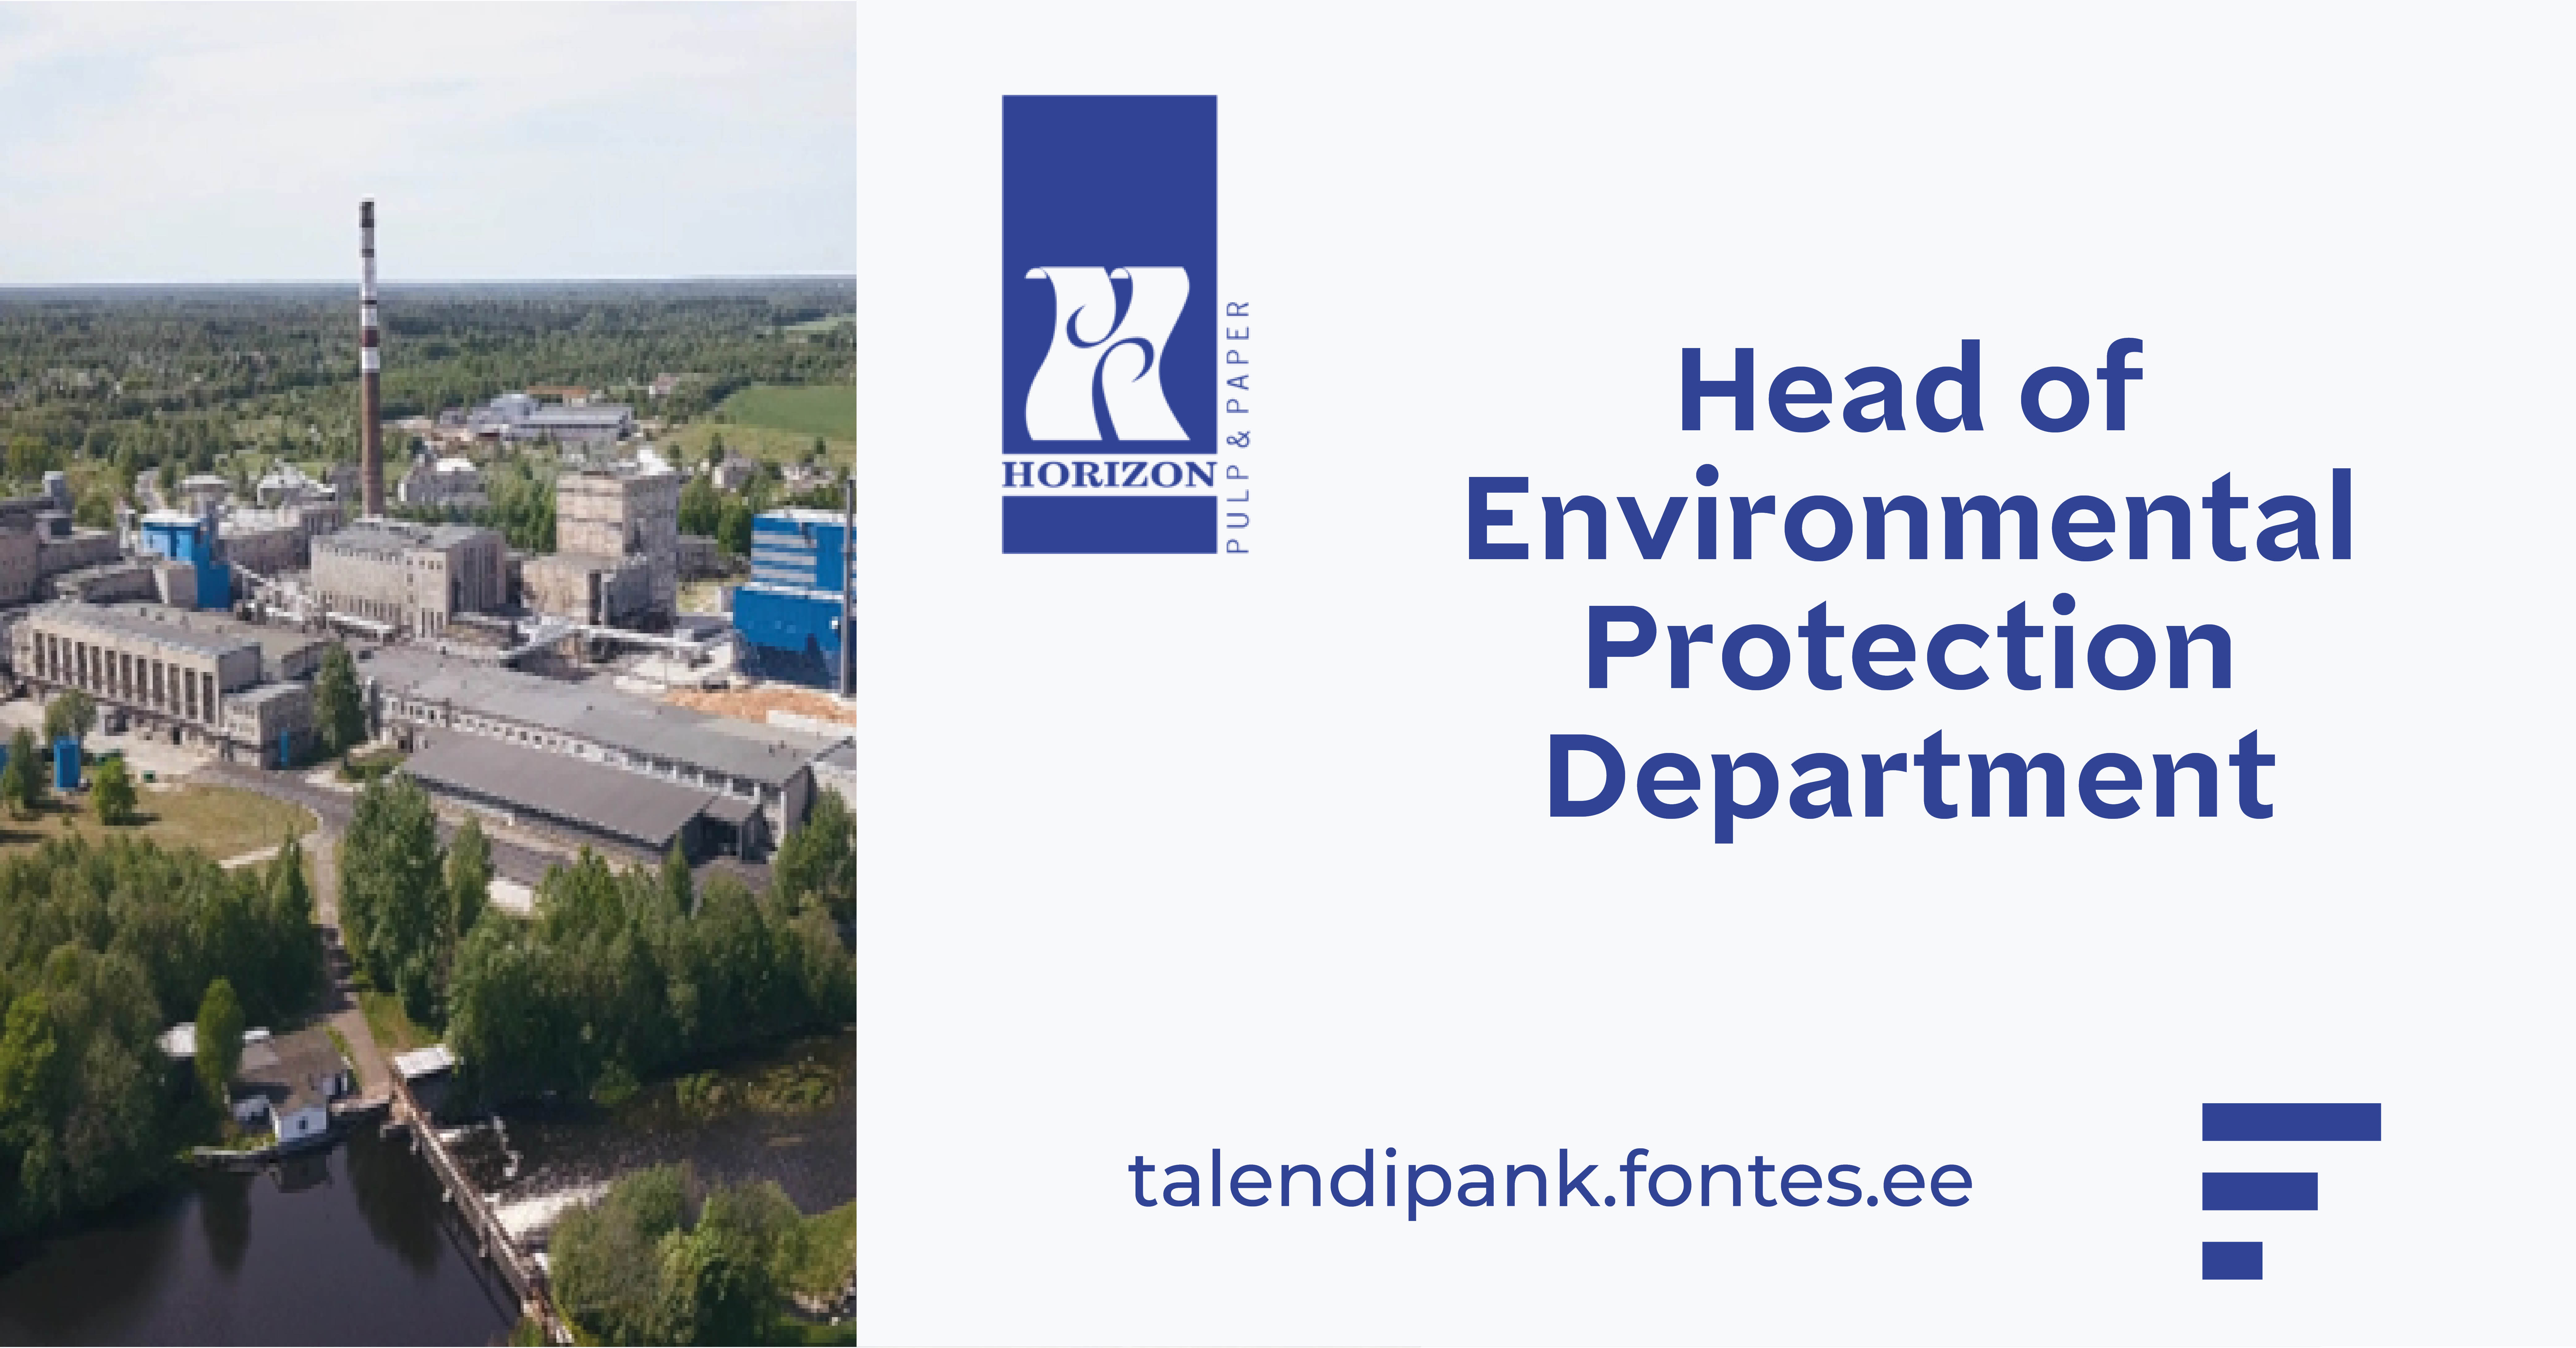 HEAD OF ENVIRONMENTAL PROTECTION DEPARTMENT